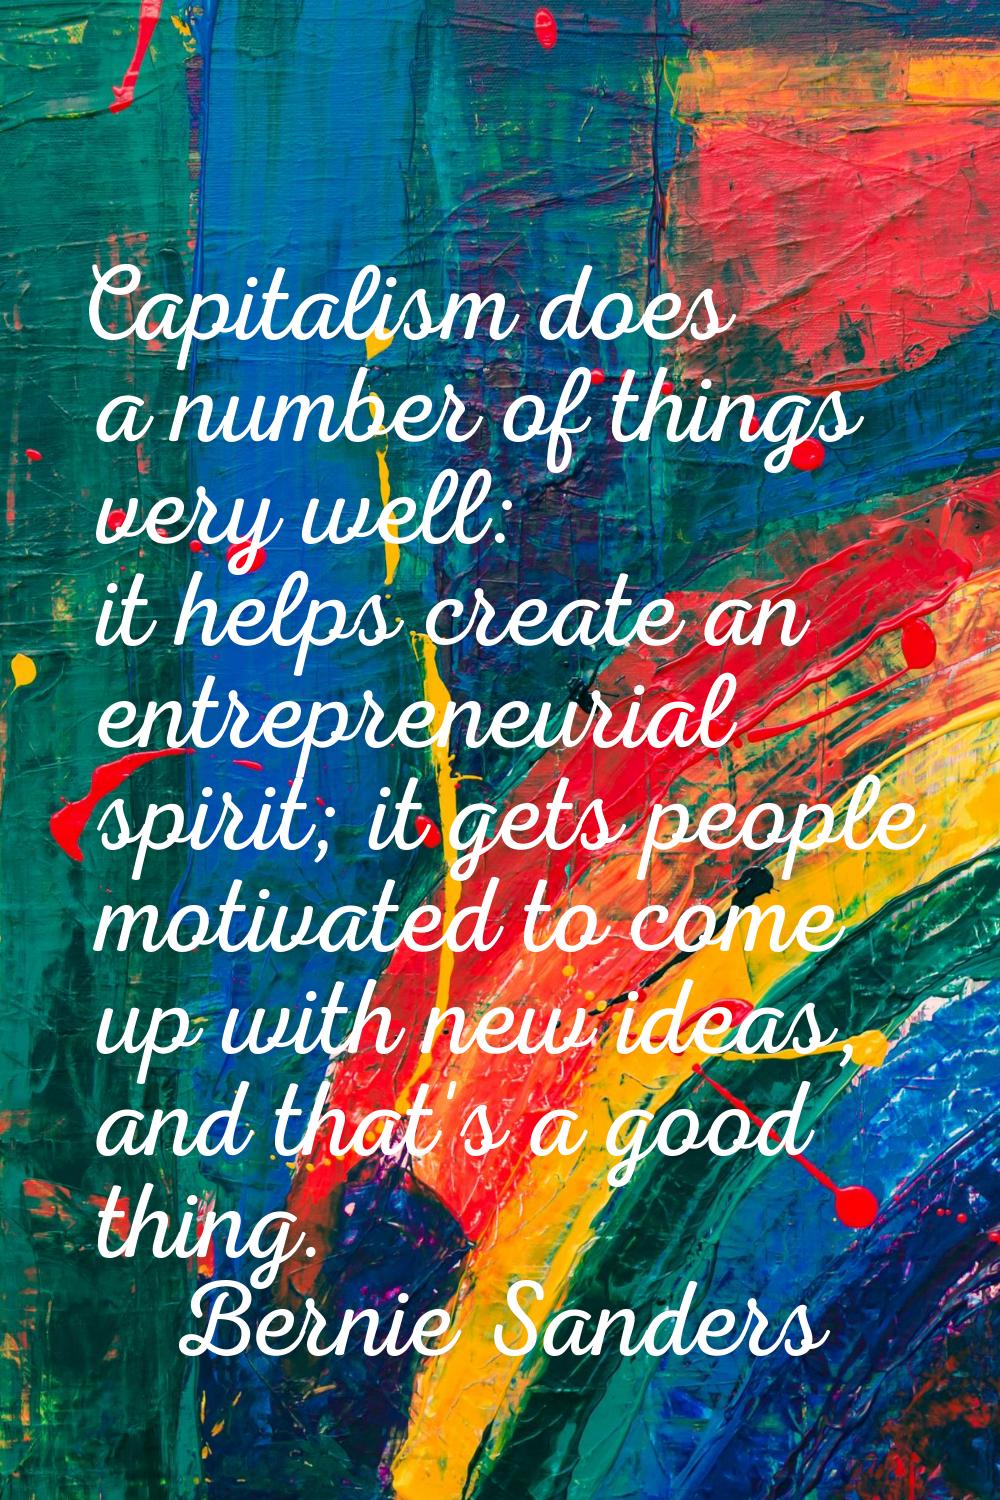 Capitalism does a number of things very well: it helps create an entrepreneurial spirit; it gets pe